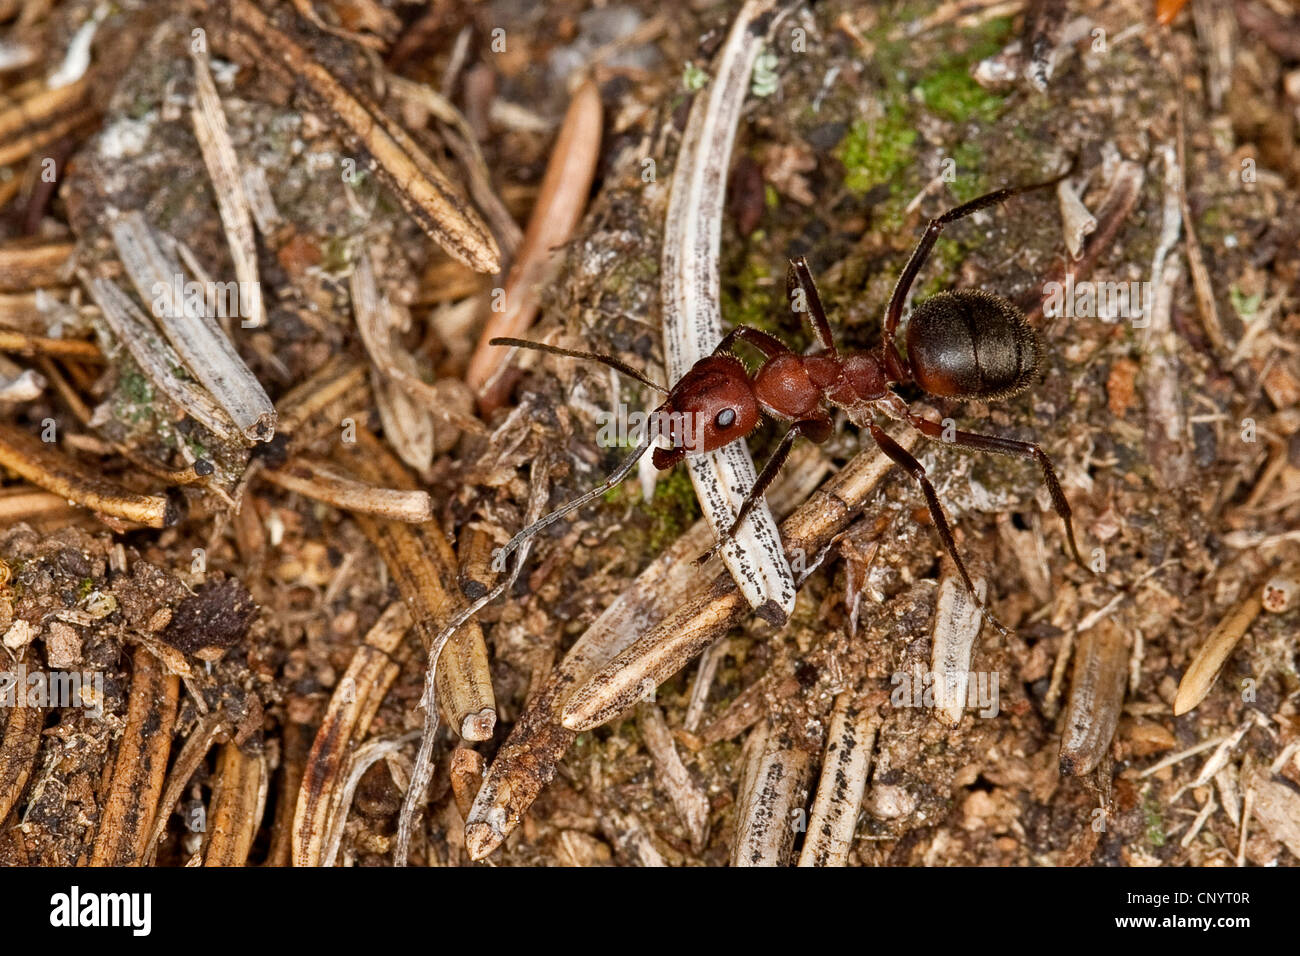 Wood ant, Wood ants (Formica truncorum), on the ground, Germany Stock Photo